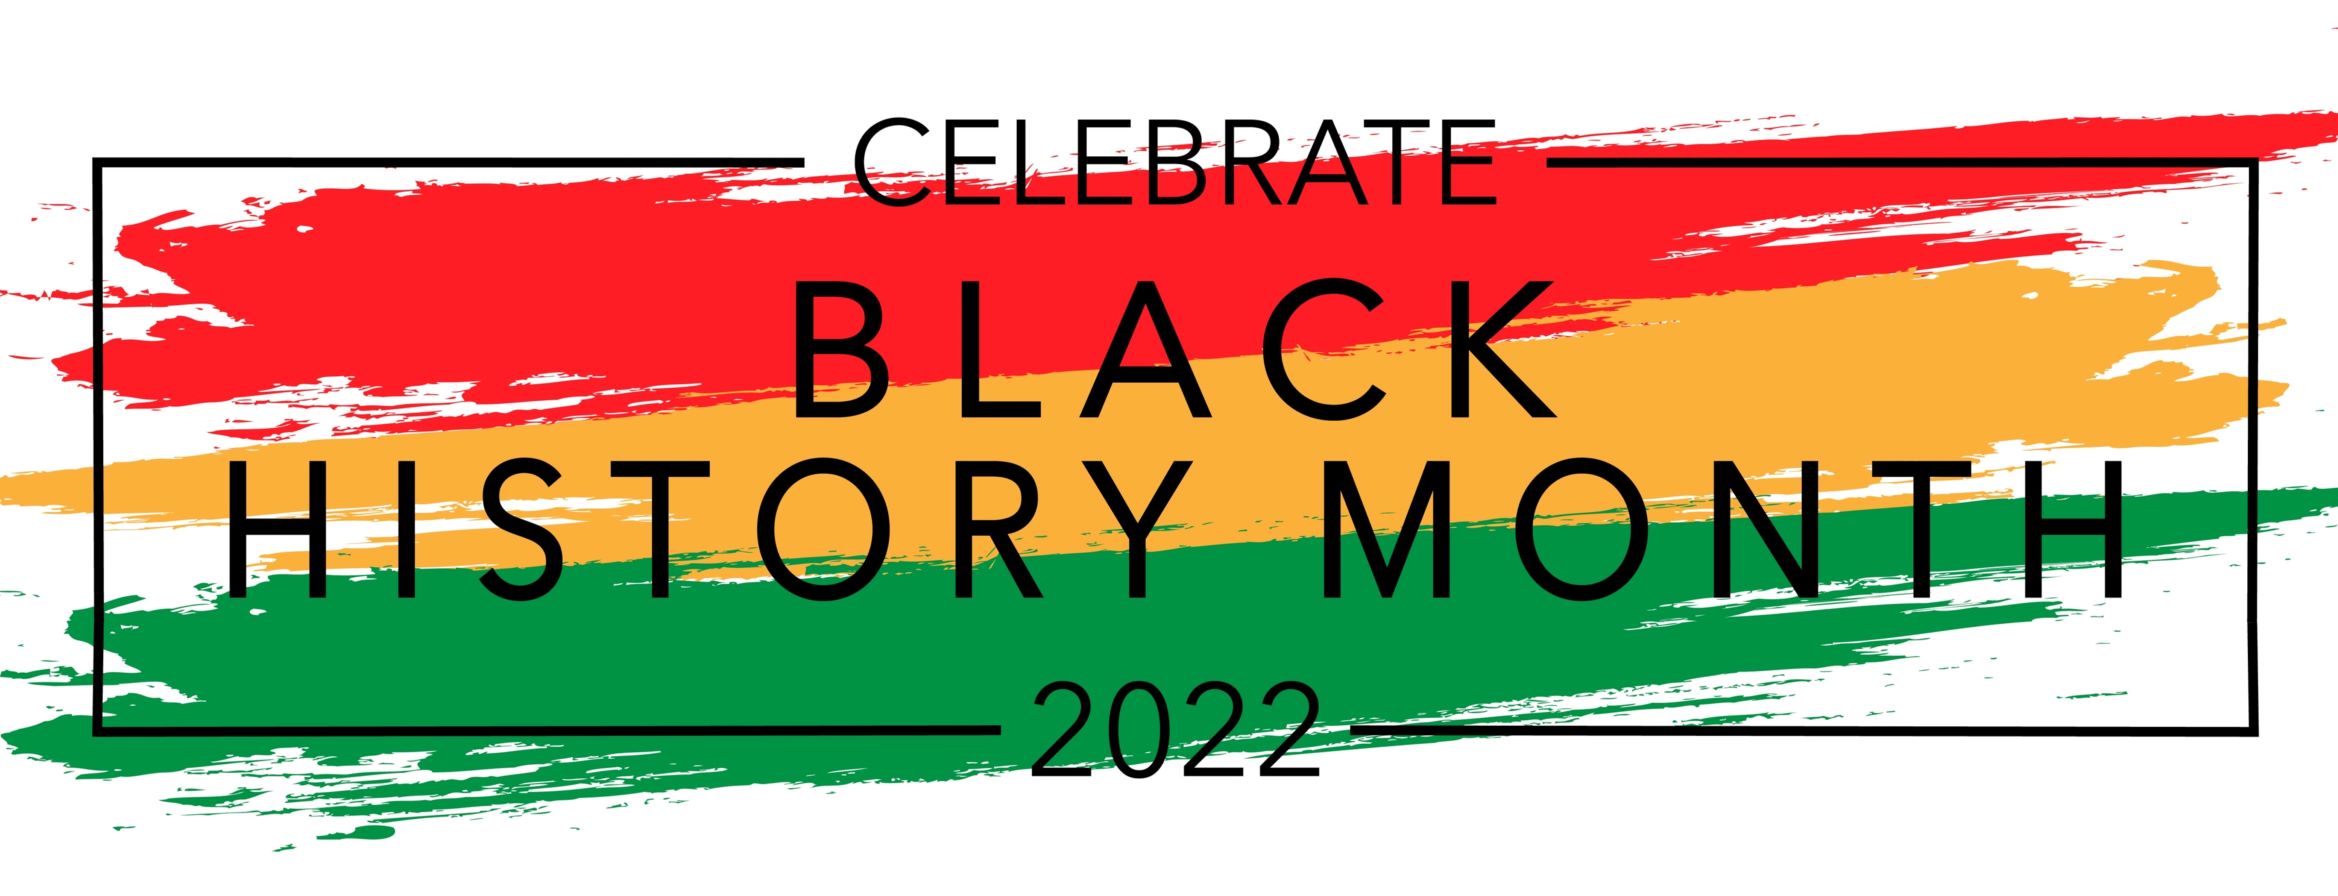 C&F Celebrates Black History Month and Remembers the Significant